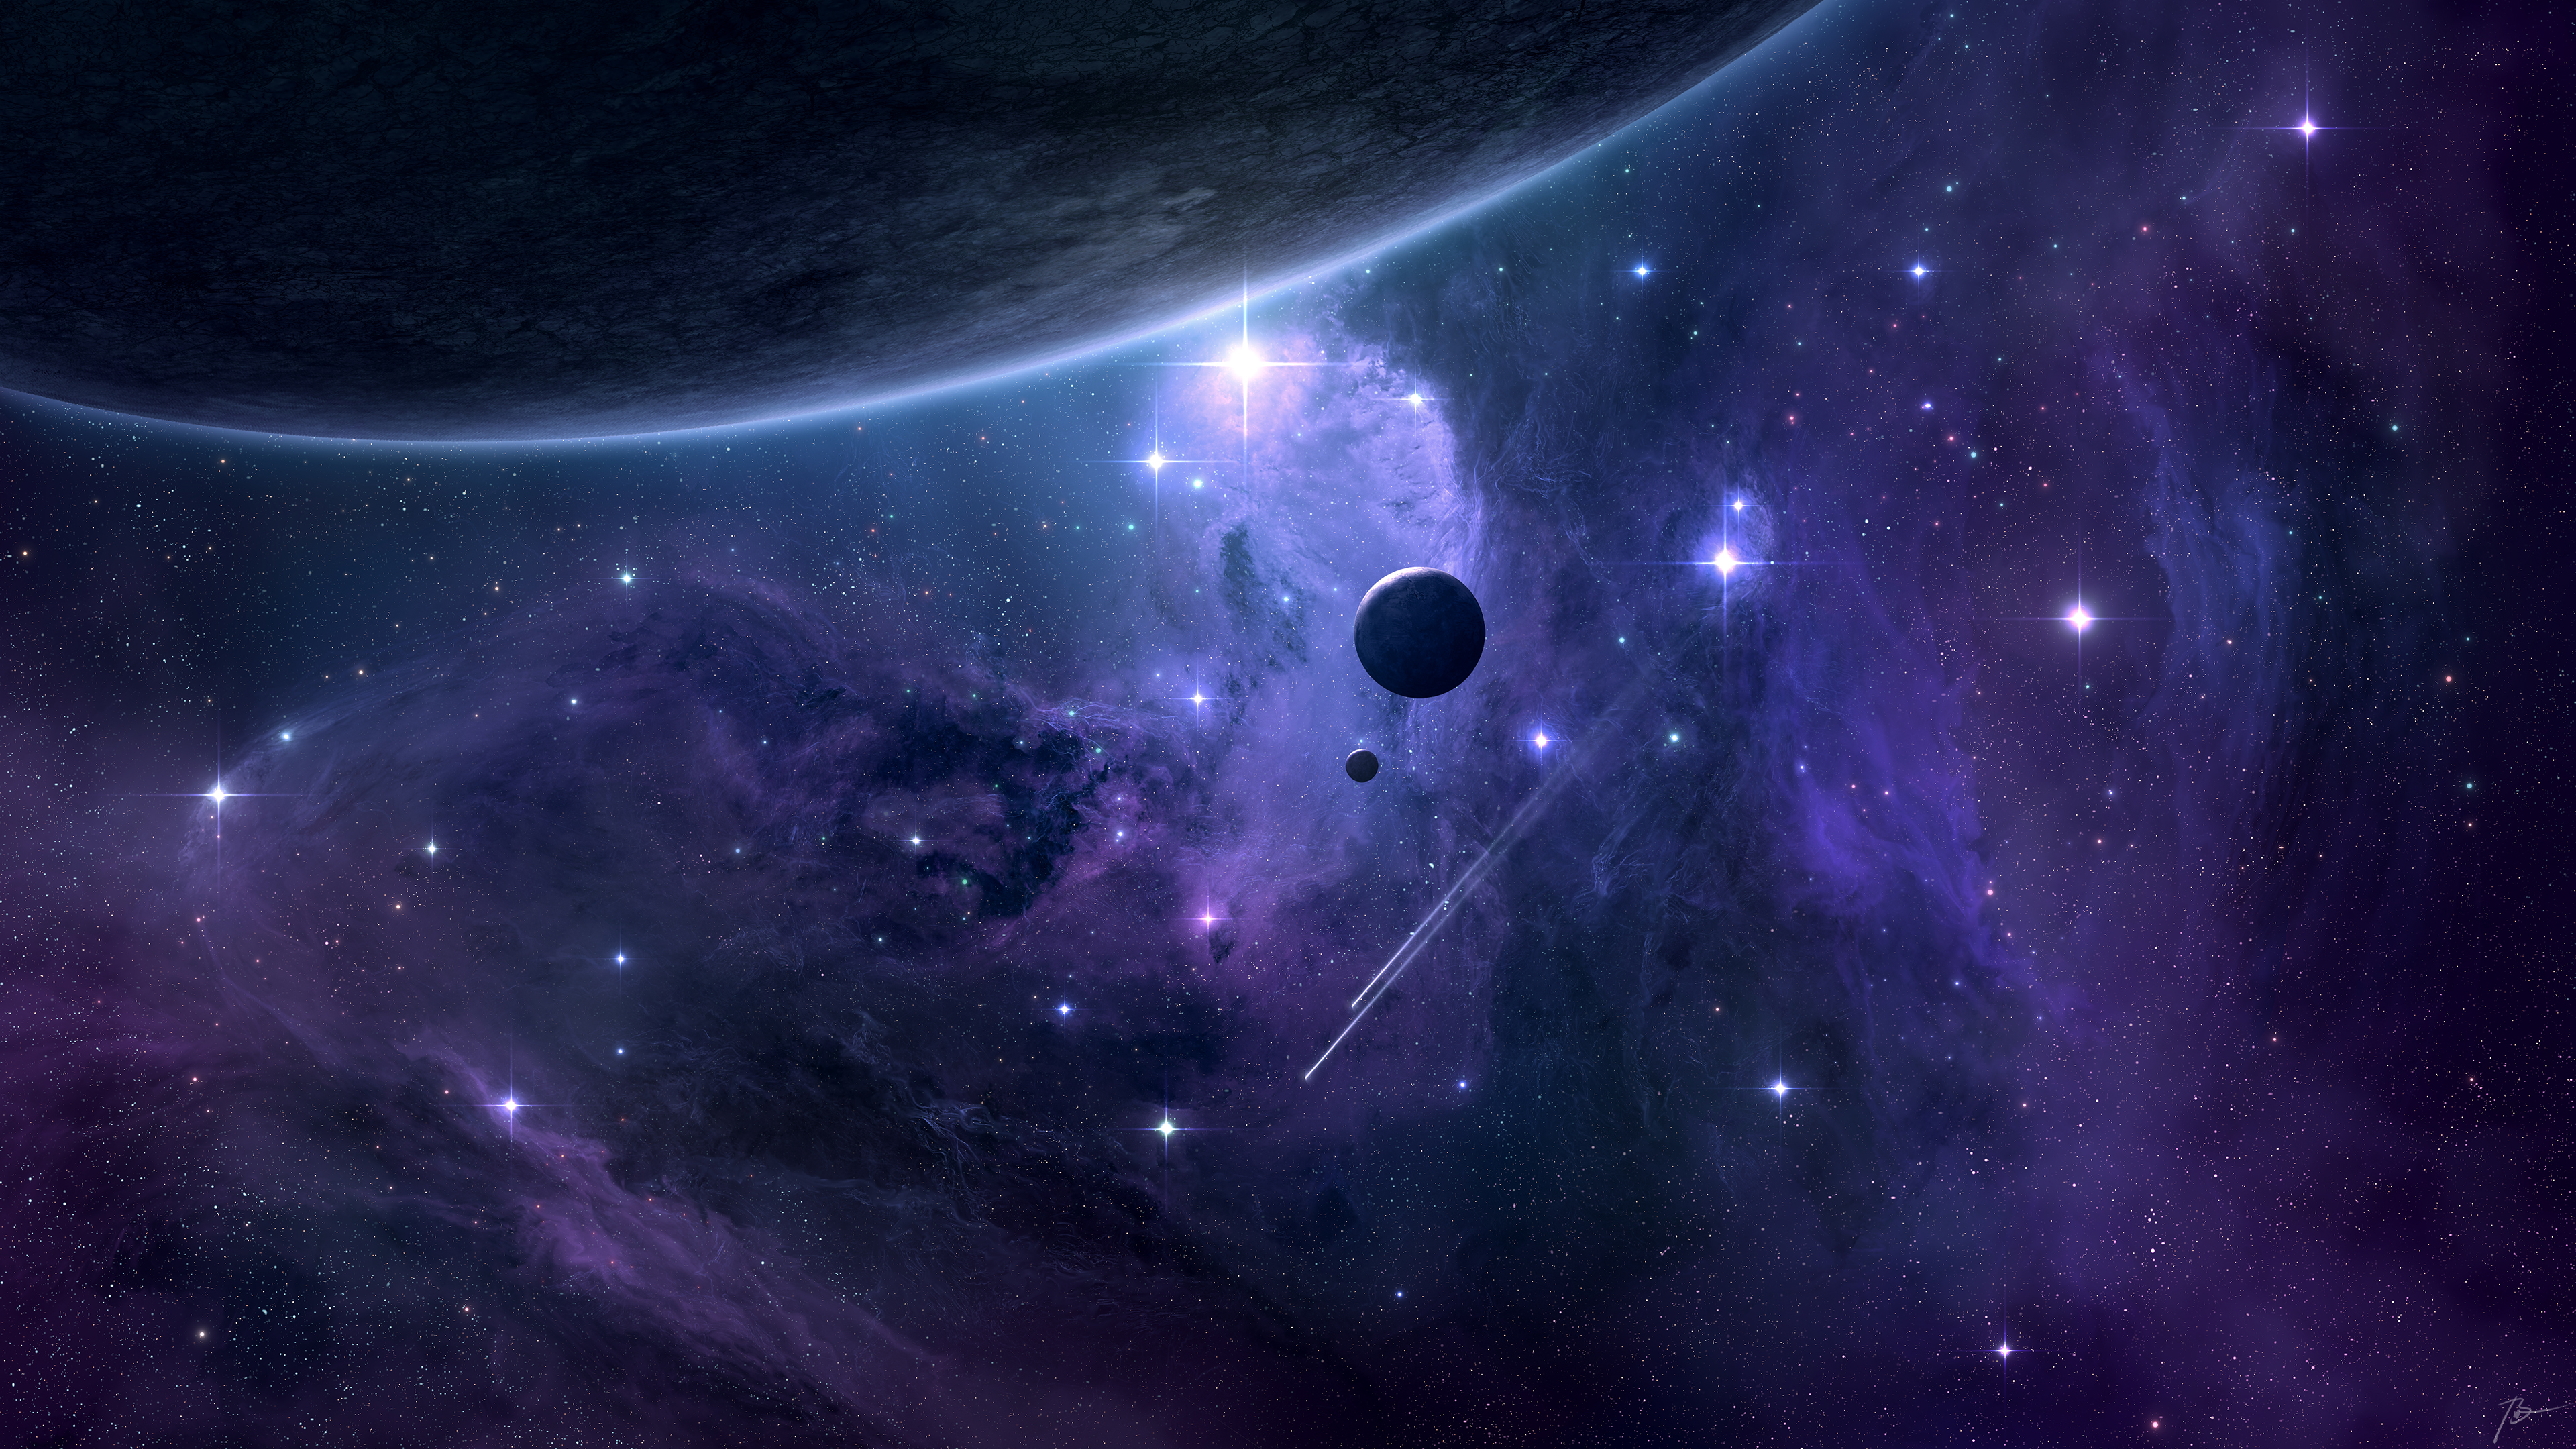 HD Wallpapers 1920x1080 Free  Cool desktop backgrounds, Planets